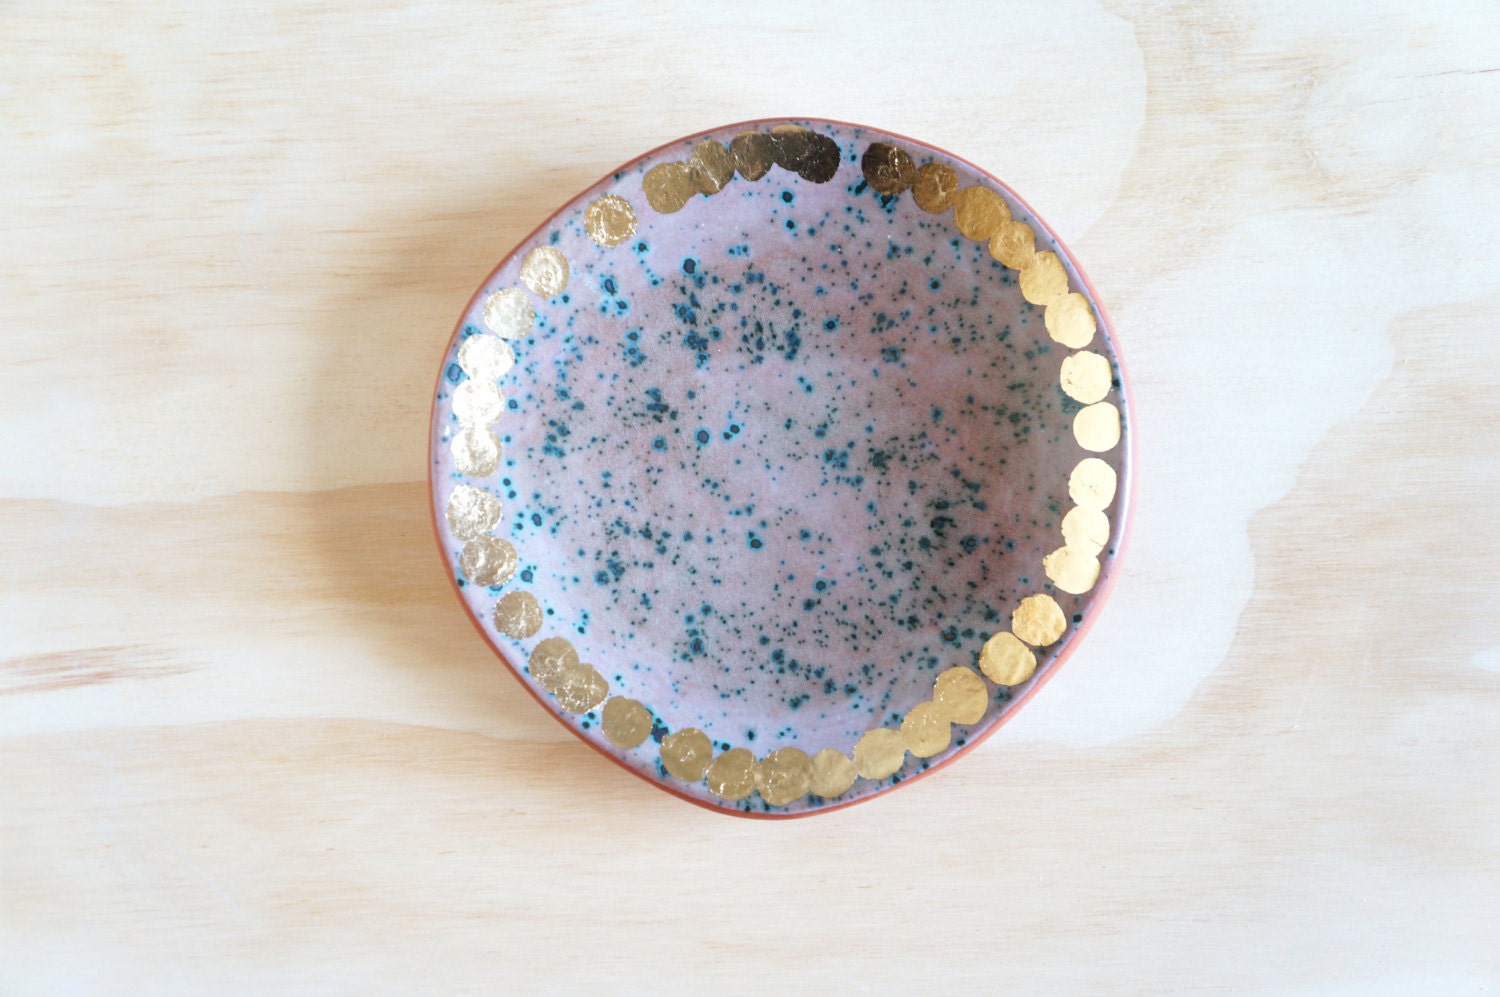 7 inch terracotta plate with speckled turquoise and gold